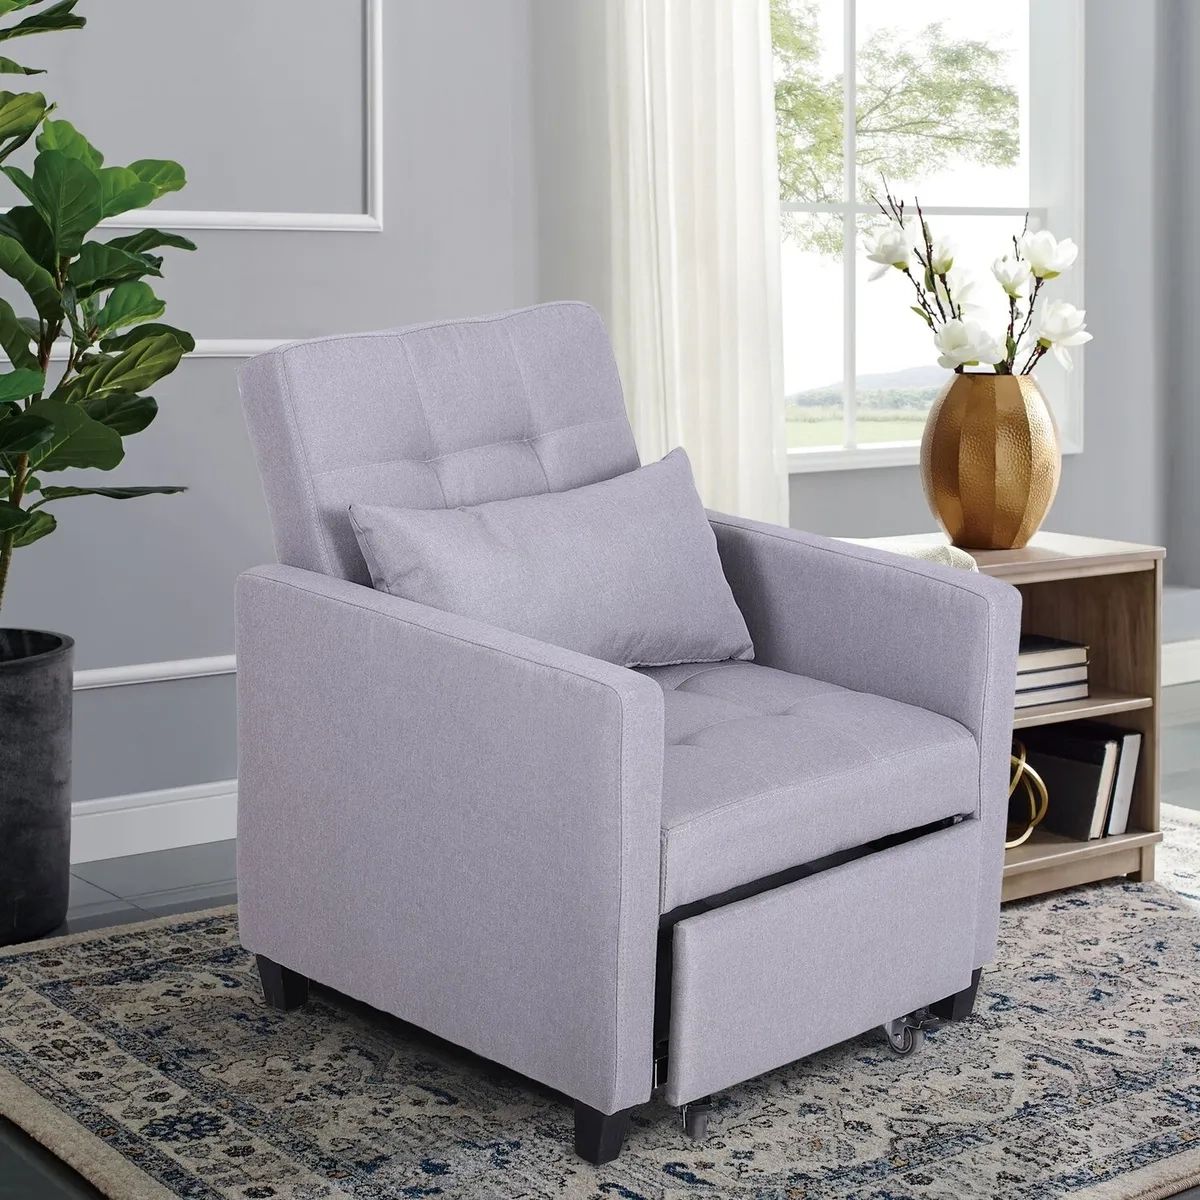 Sofa Bed 3 In 1 Lounger Recliner Chairs Convertible Pull Out Sleeper Chair  Gray | Ebay Inside Convertible Light Gray Chair Beds (Photo 8 of 15)